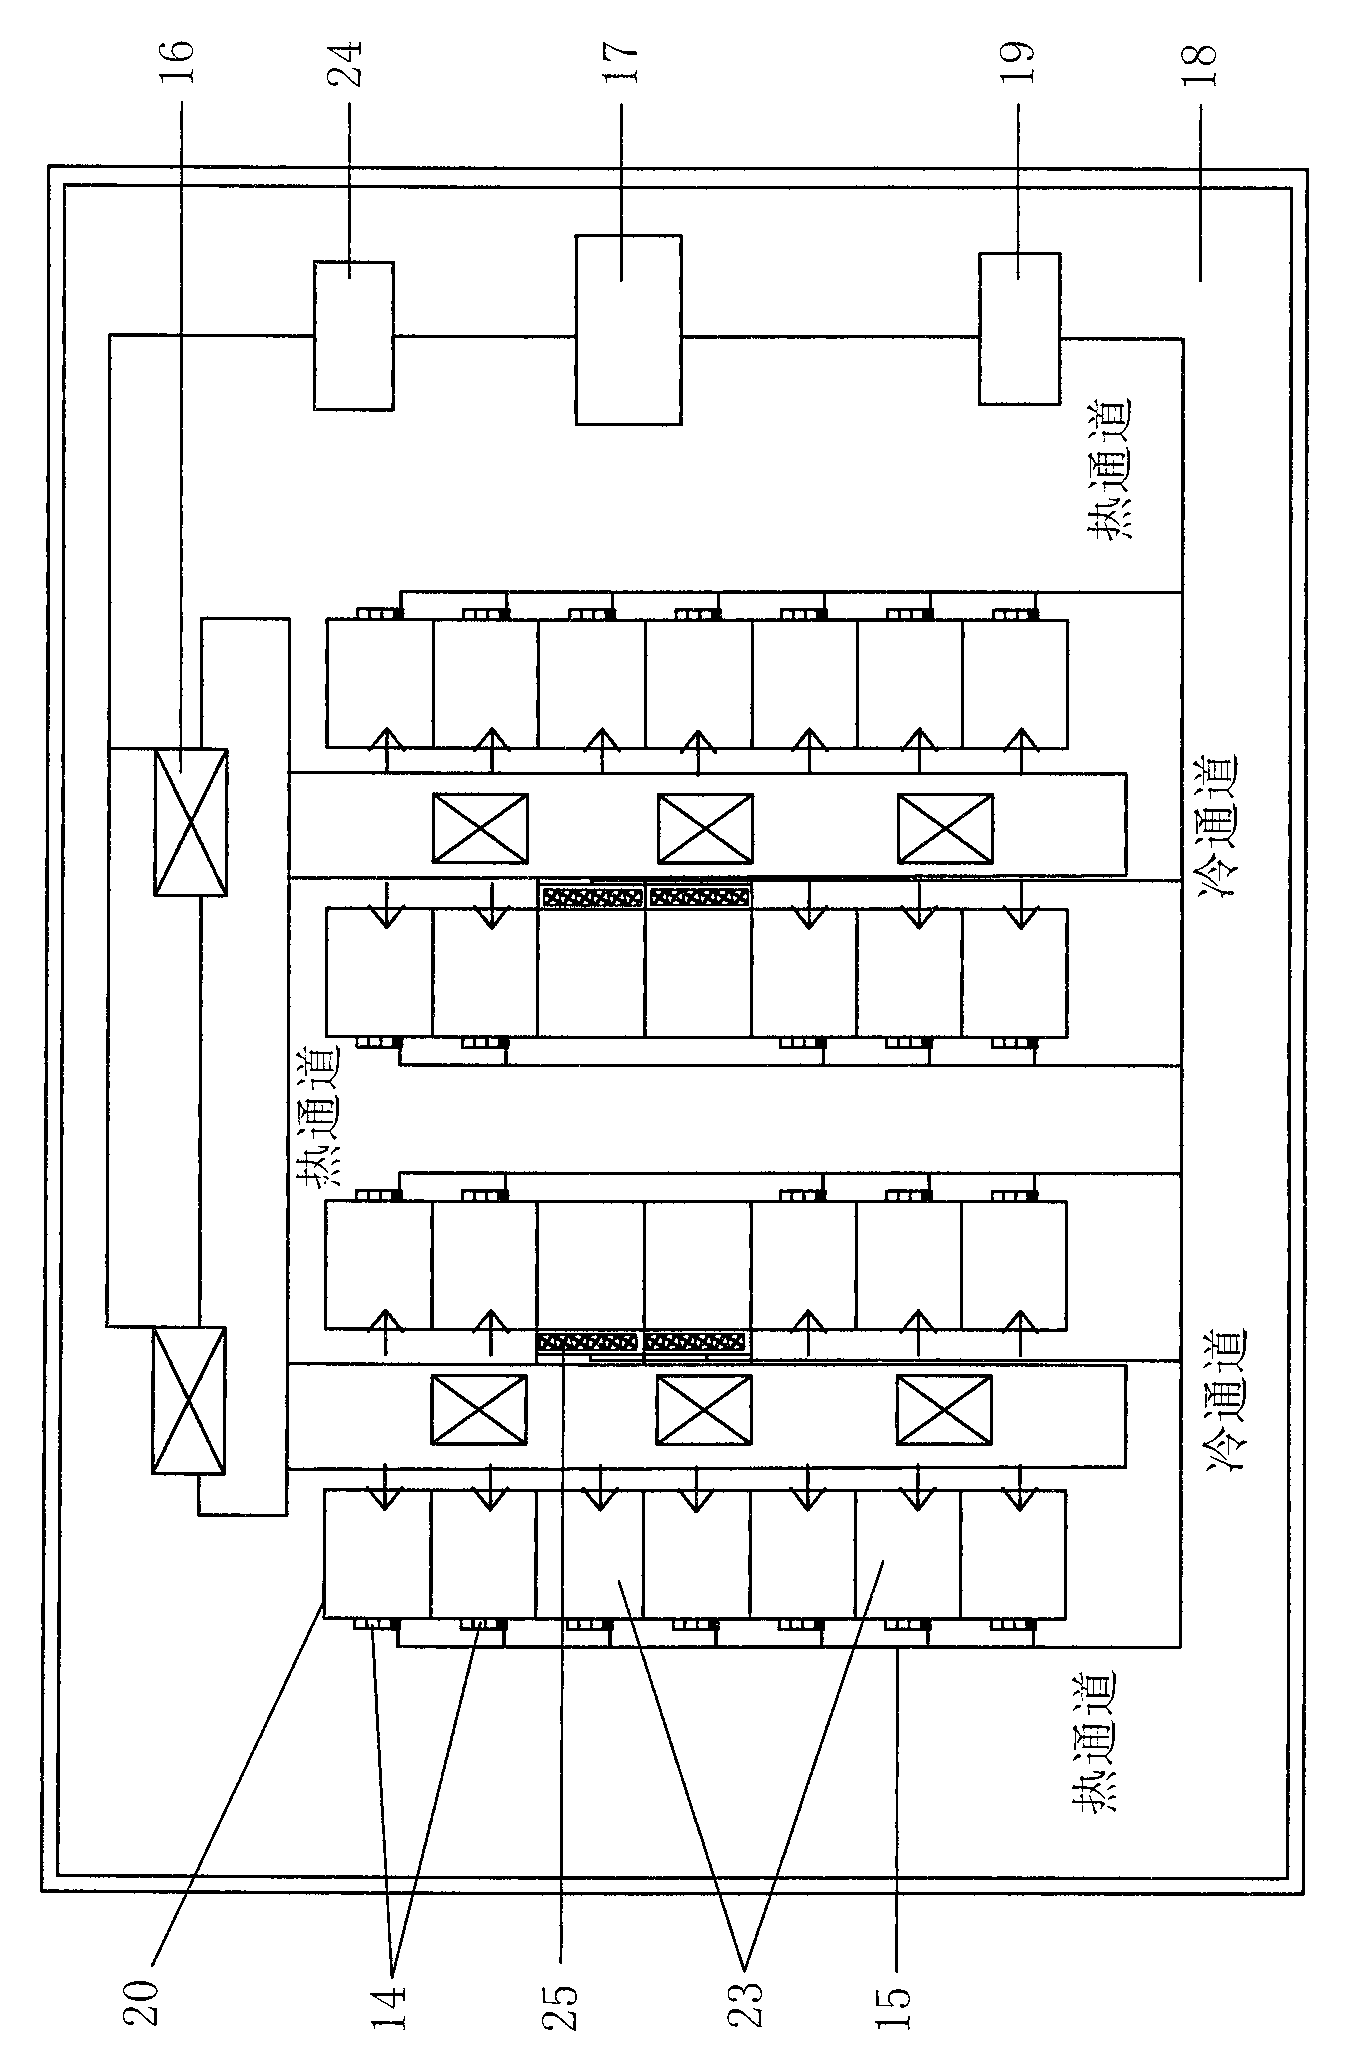 Variable-air-volume intelligent airflow regulating and controlling system of data machine room